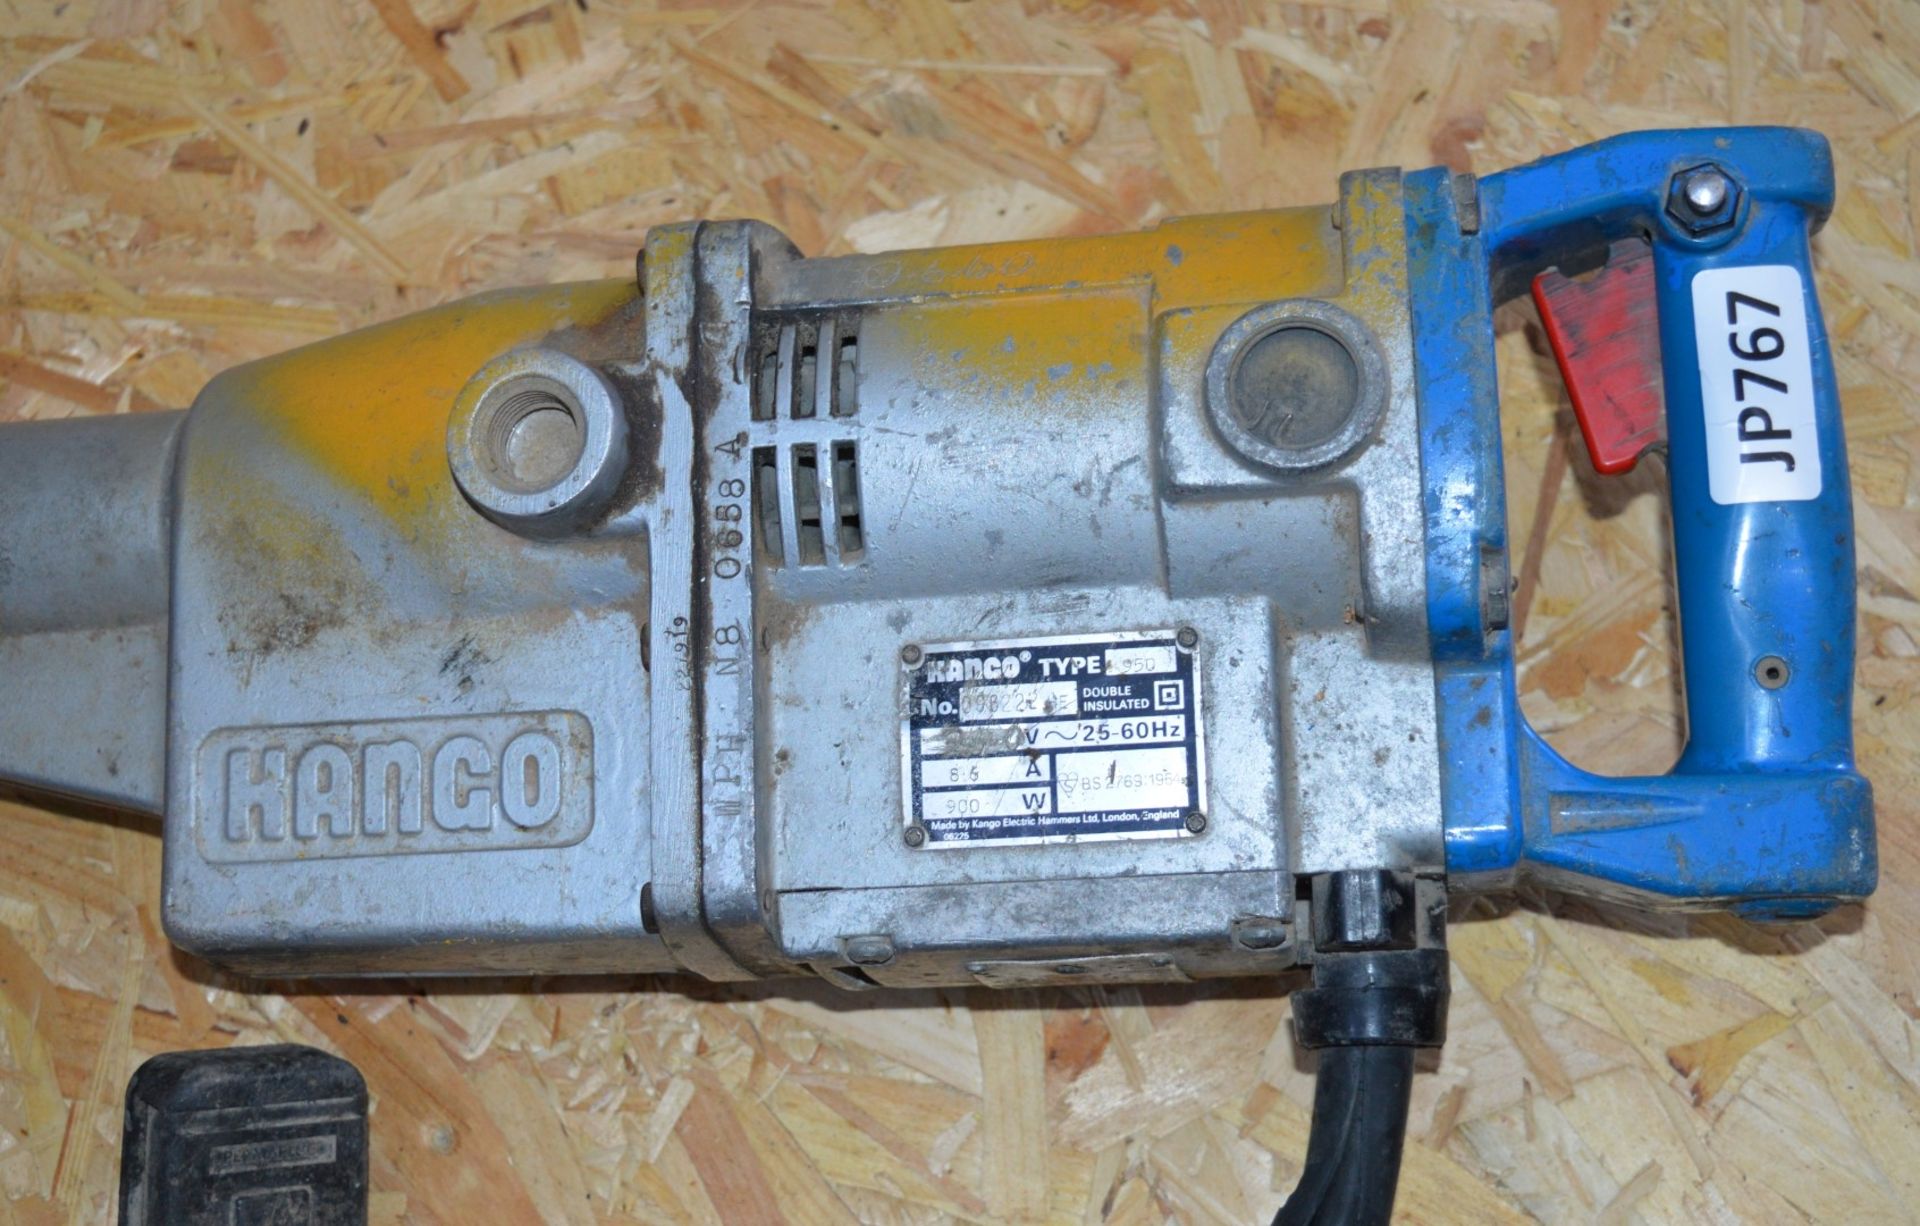 1 x Kango 950 Concrete Breaker / Hammer Drill With Two Drill Bits - 240v UK Plug - CL011 - Ref JP767 - Image 5 of 9